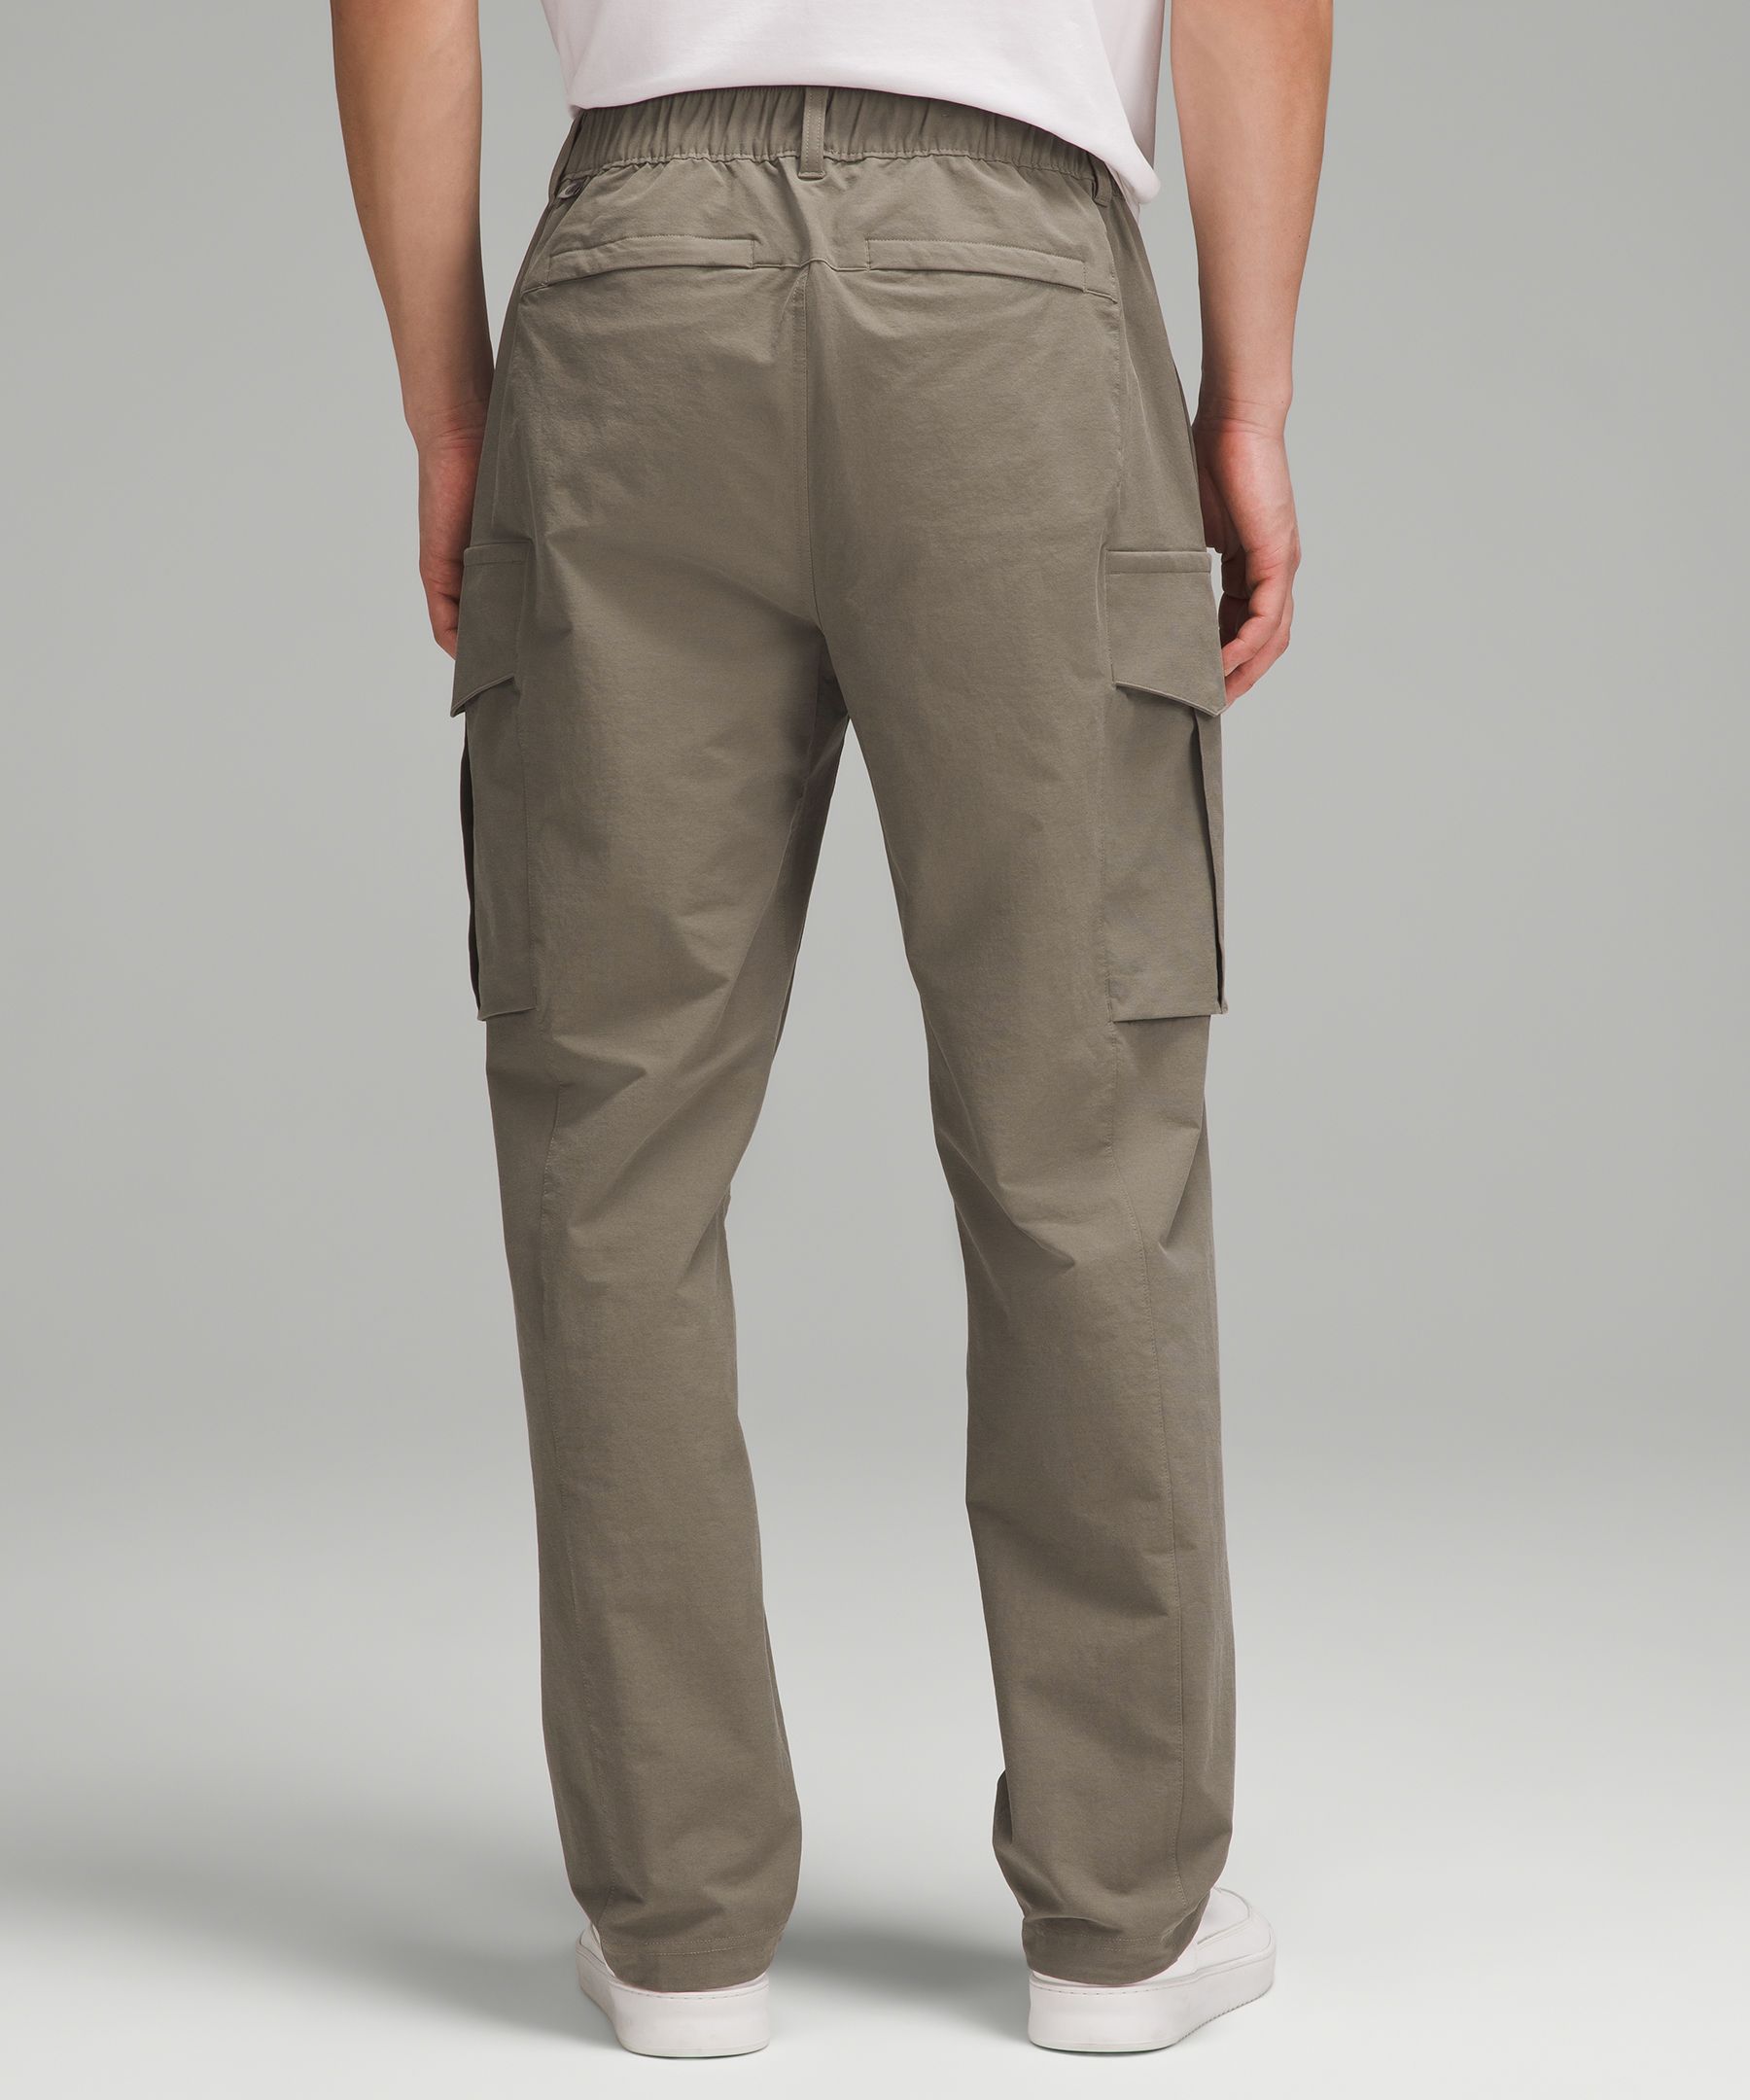 Brown Casual Pants - Men's Stretch Cotton VersaTwill Relaxed-Fit Cargo Pant 35 | Lululemon